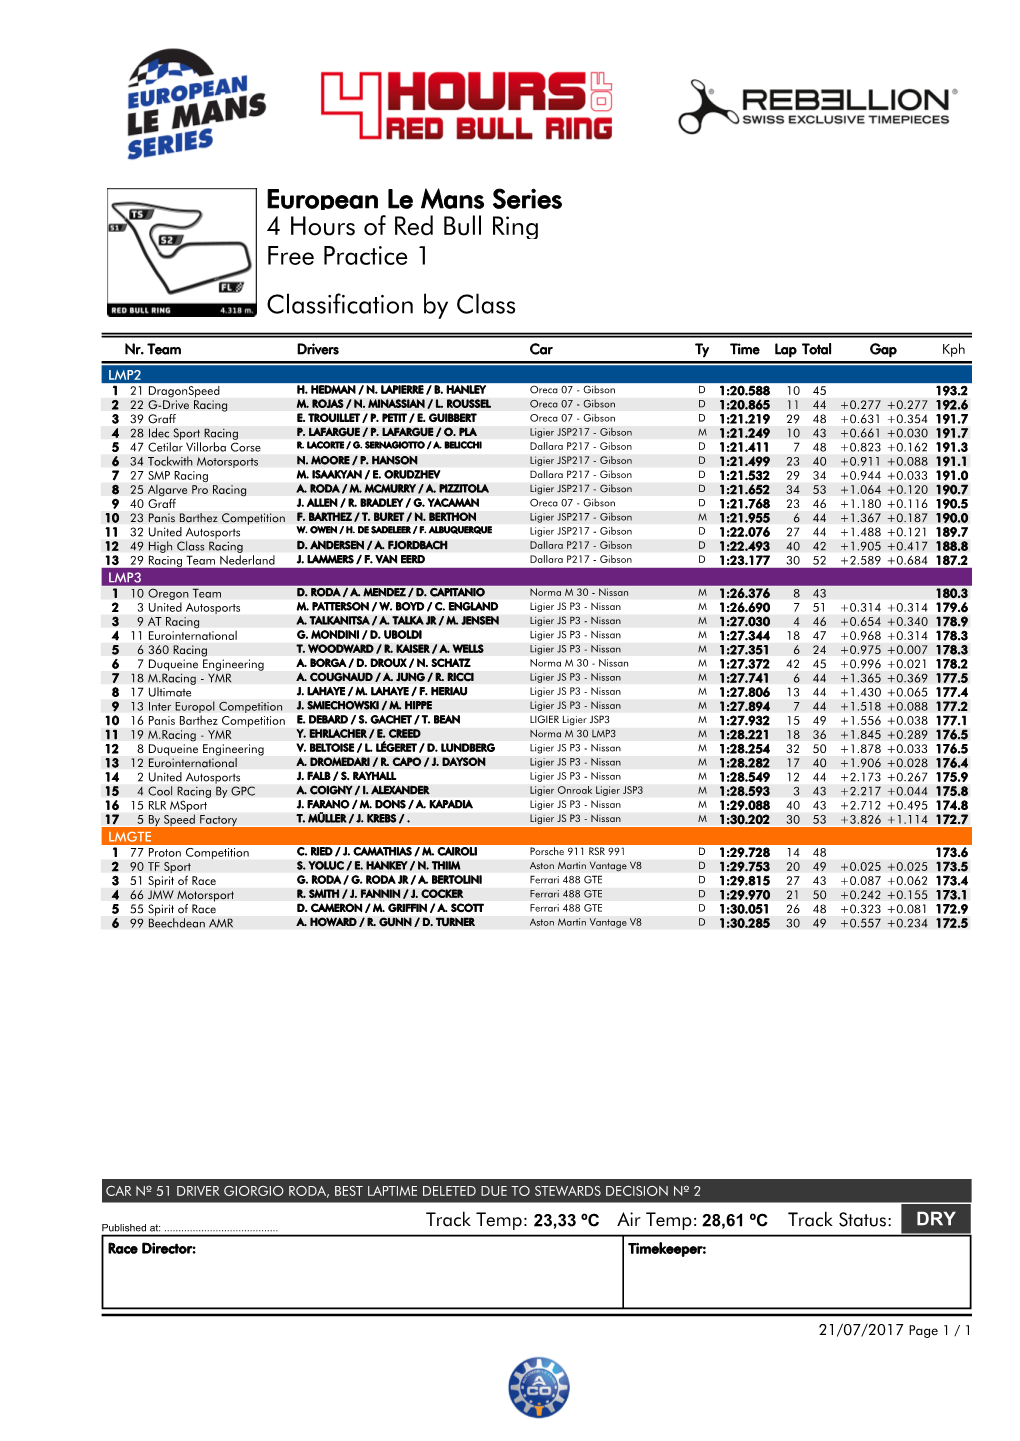 Free Practice 1 4 Hours of Red Bull Ring European Le Mans Series